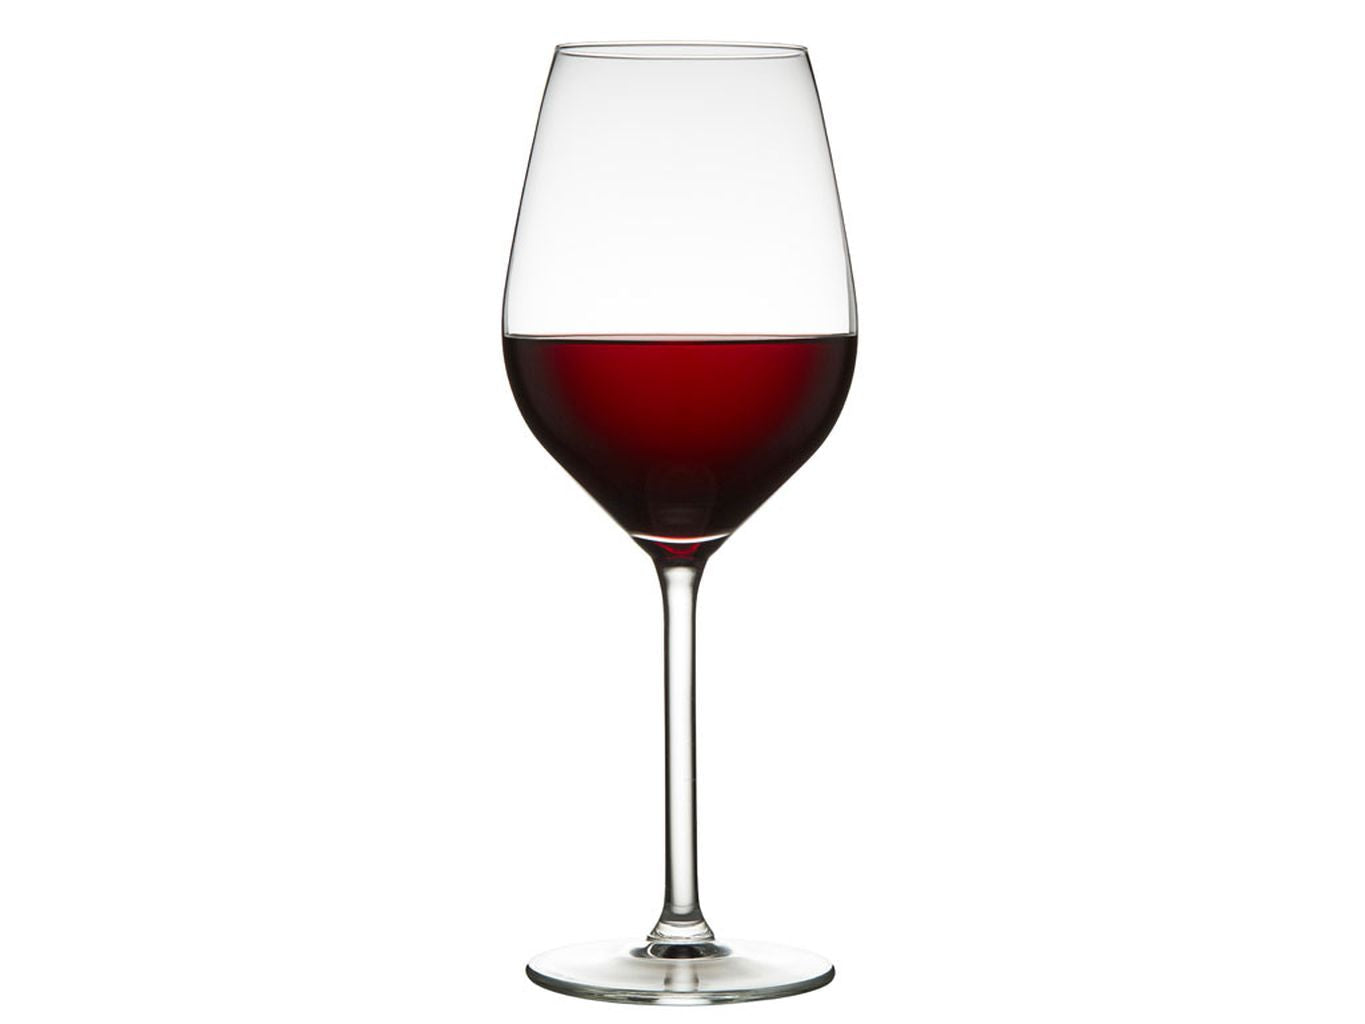 Lyngby Glas Juvel Red Wine Glass 50 Cl, 4 pc's.